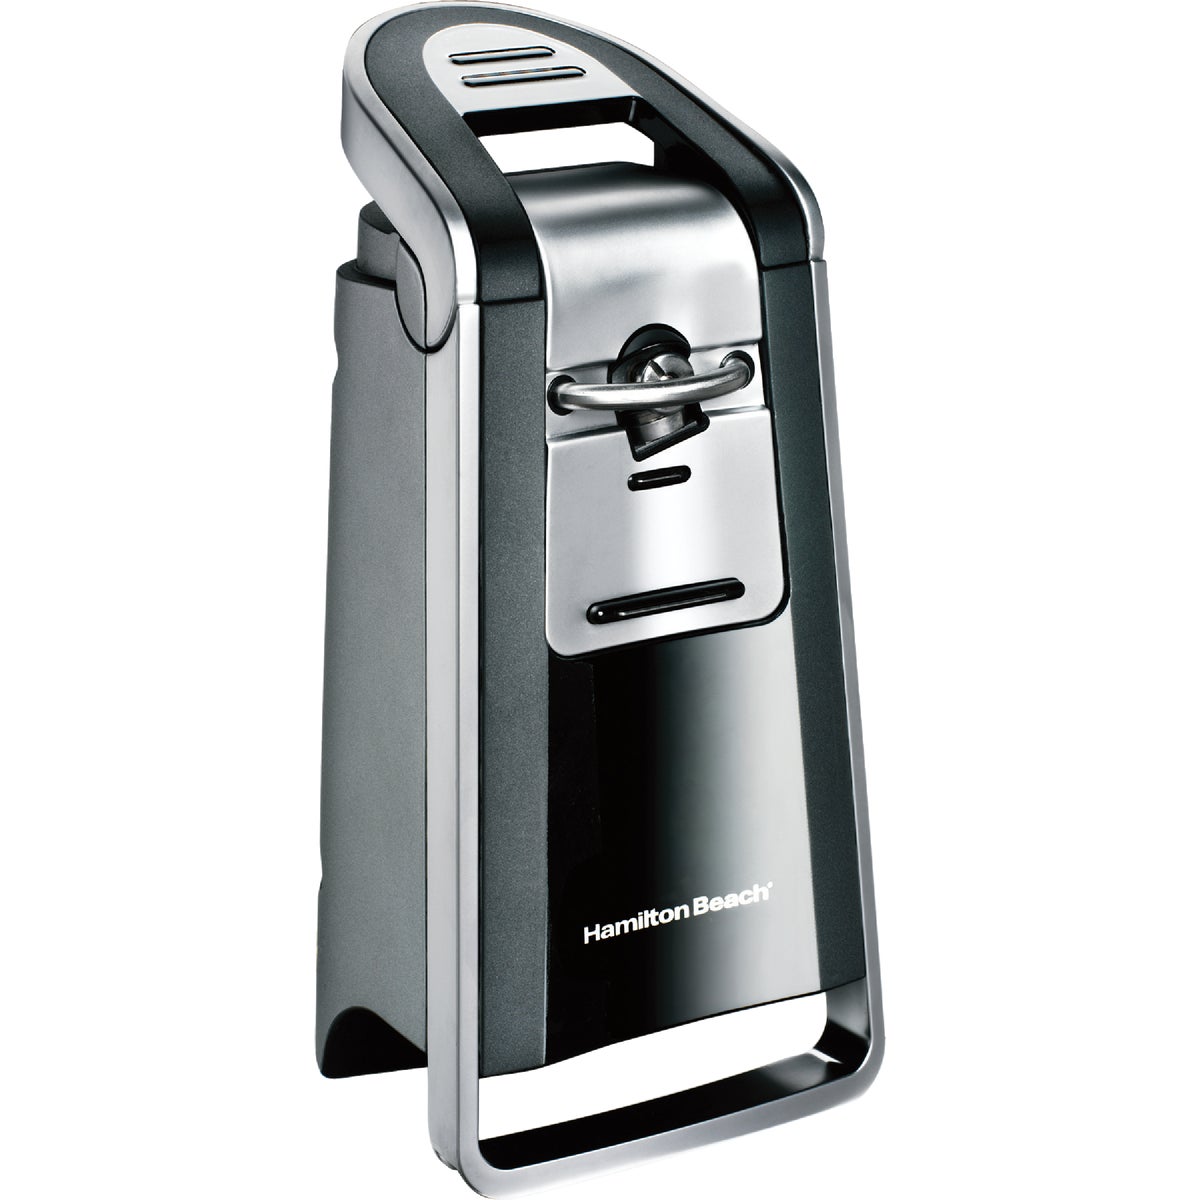 Item 650229, Smooth Touch Can Opener easily opens both pop-top and regular cans with the